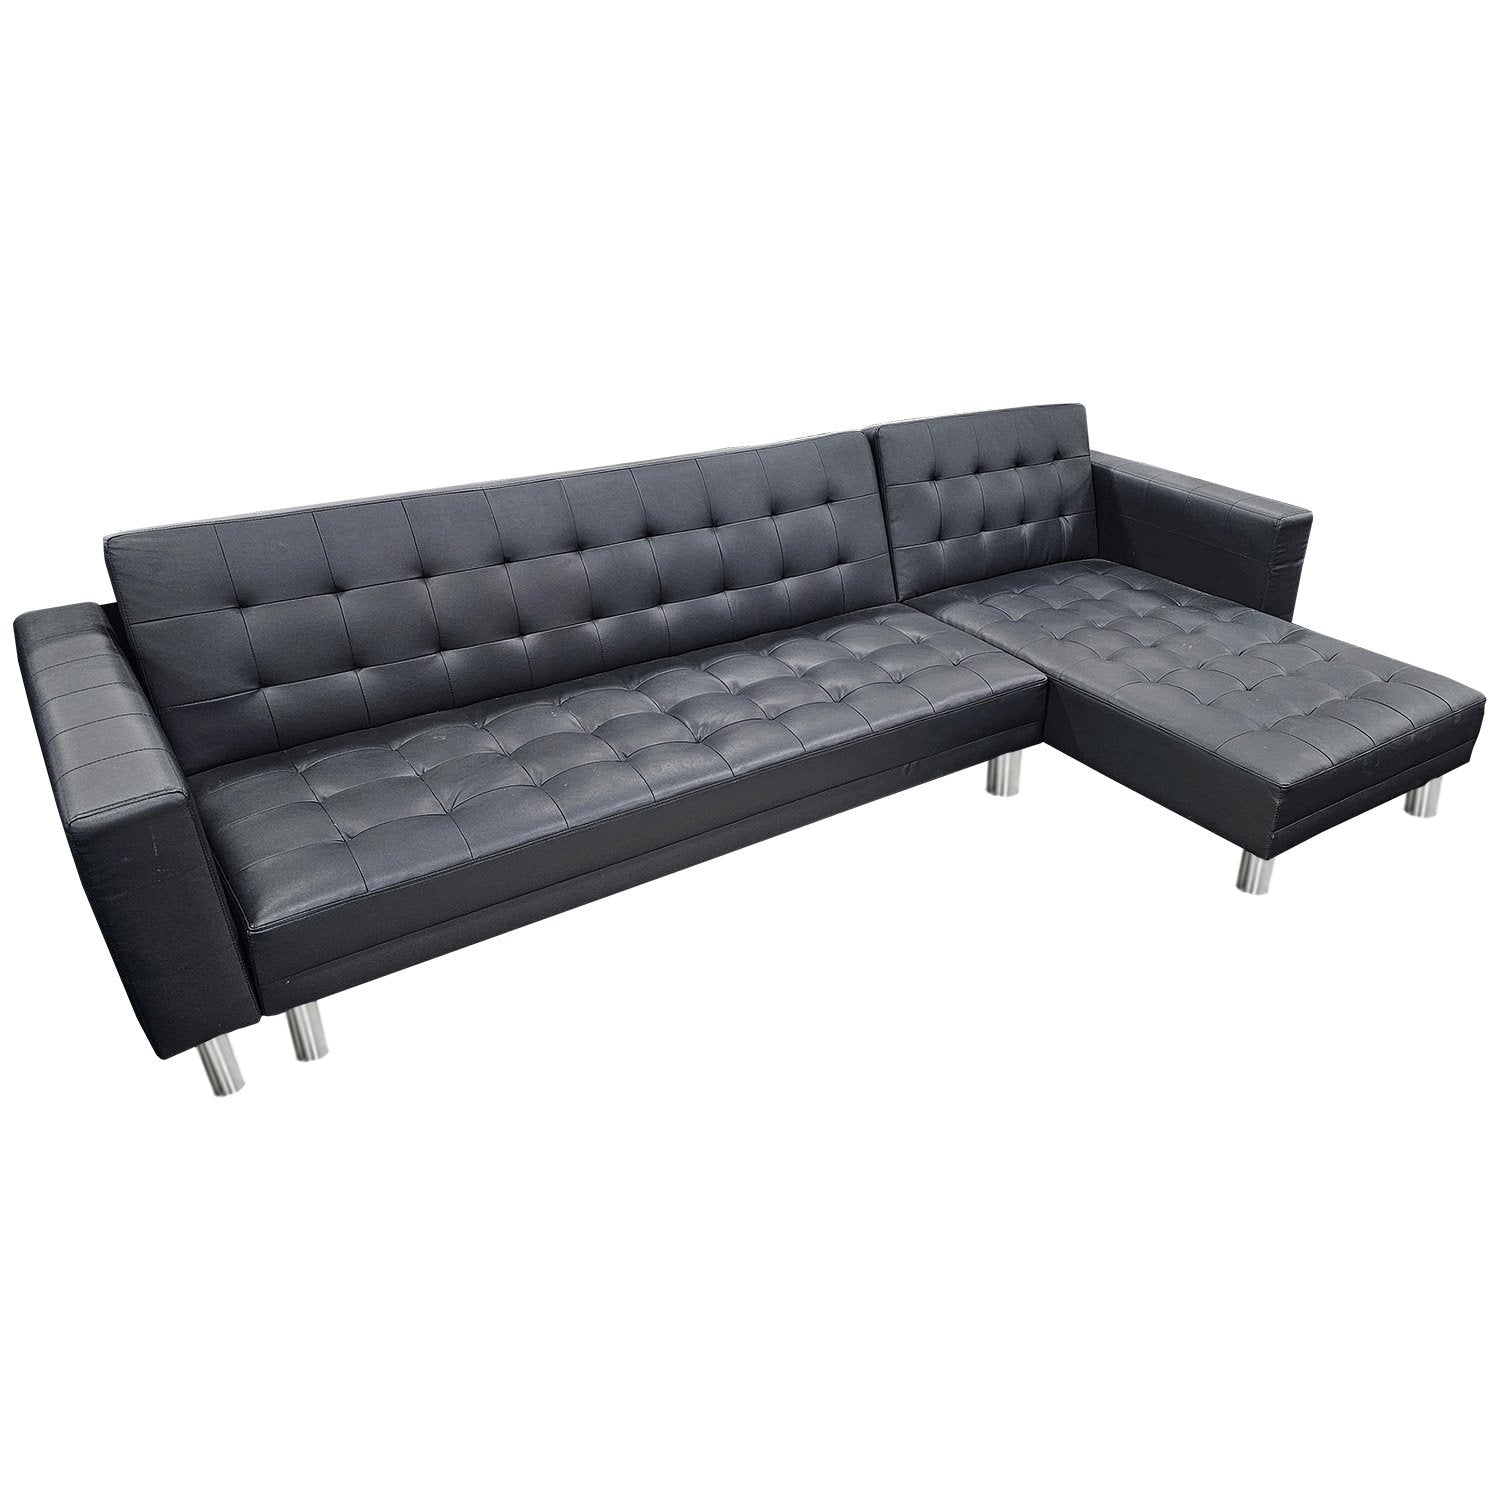 Sarantino Corner Faux Leather Sofa Bed Couch with Chaise - Black - 0